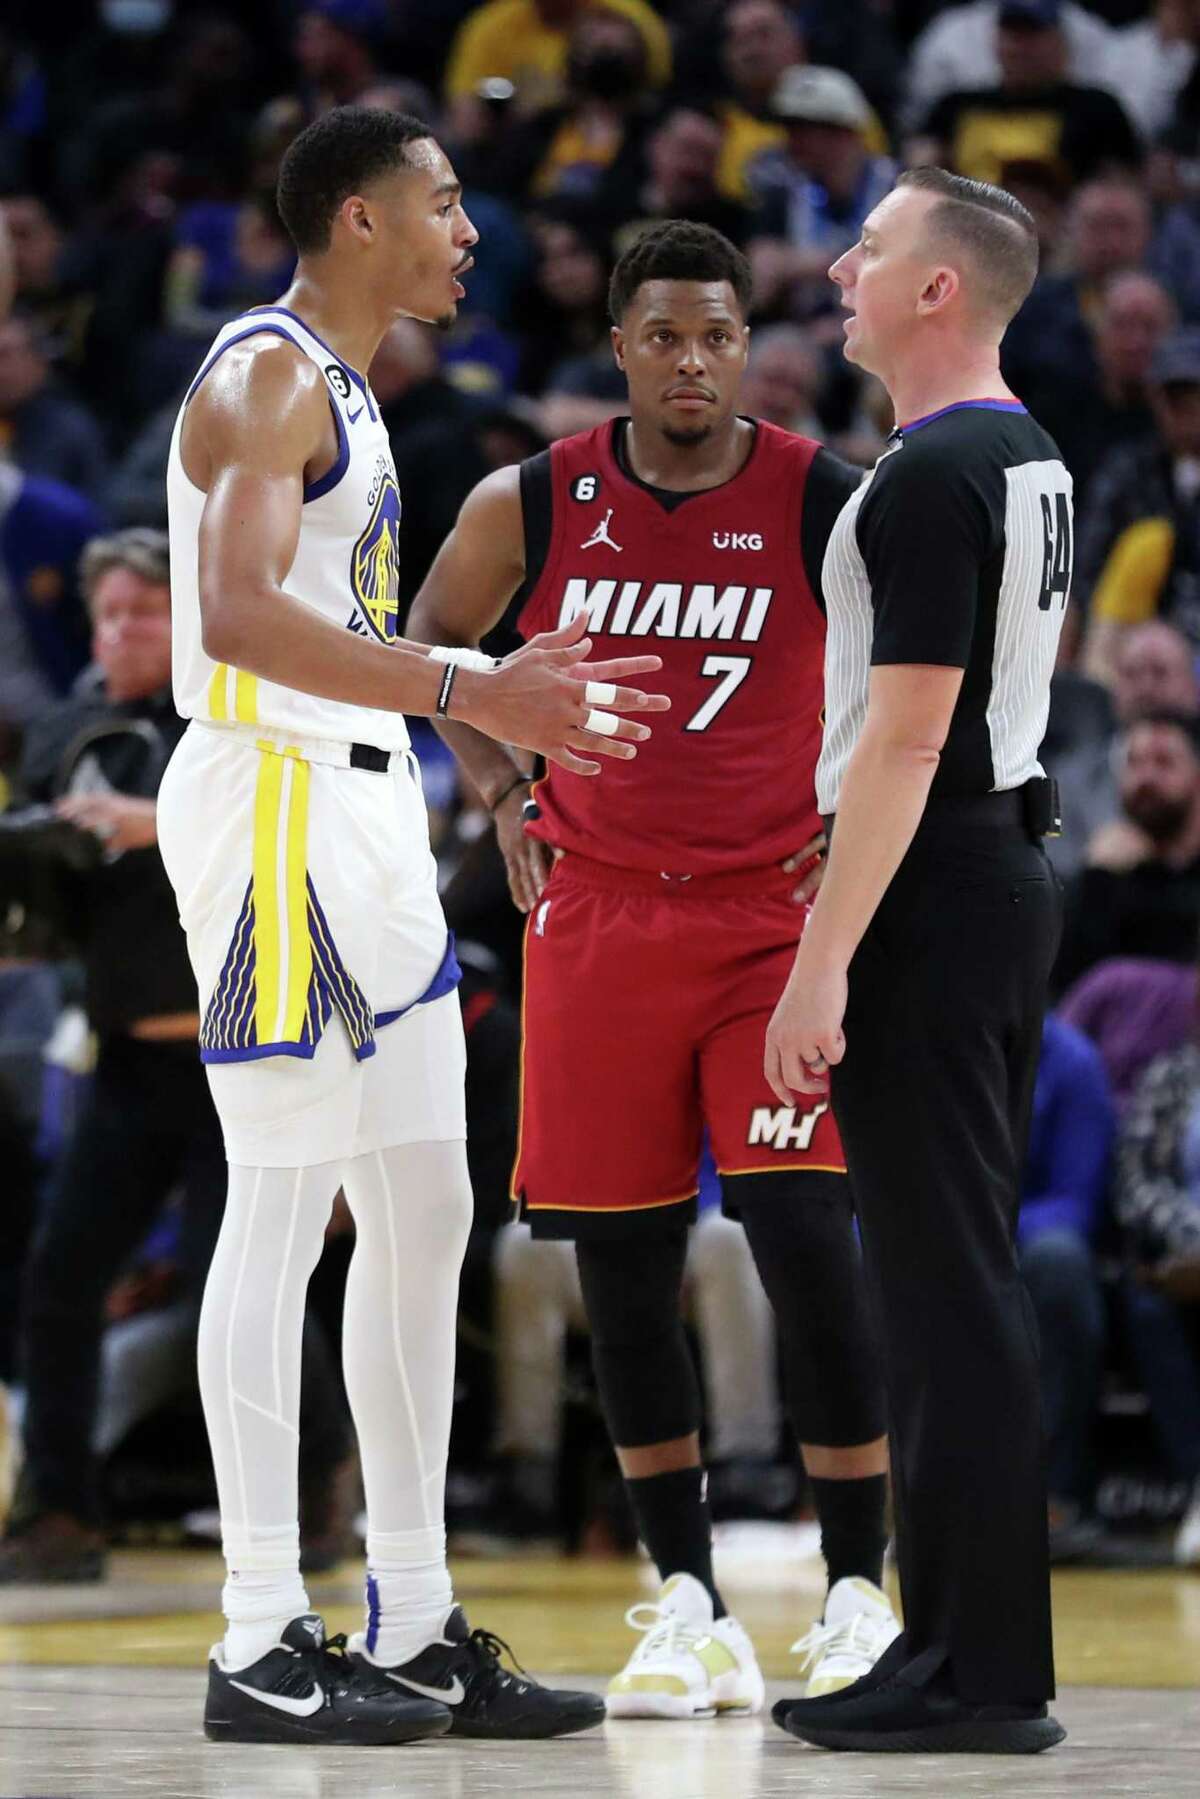 Golden State Warriors’ Jordan Poole discusses his technical foul with official Justin Van Duyne as Miami Heat’s Kyle Lowry looks on during Warriors’ 123-110 win in NBA game at Chase Center in San Francisco, Calif., on Thursday, October 27, 2022.